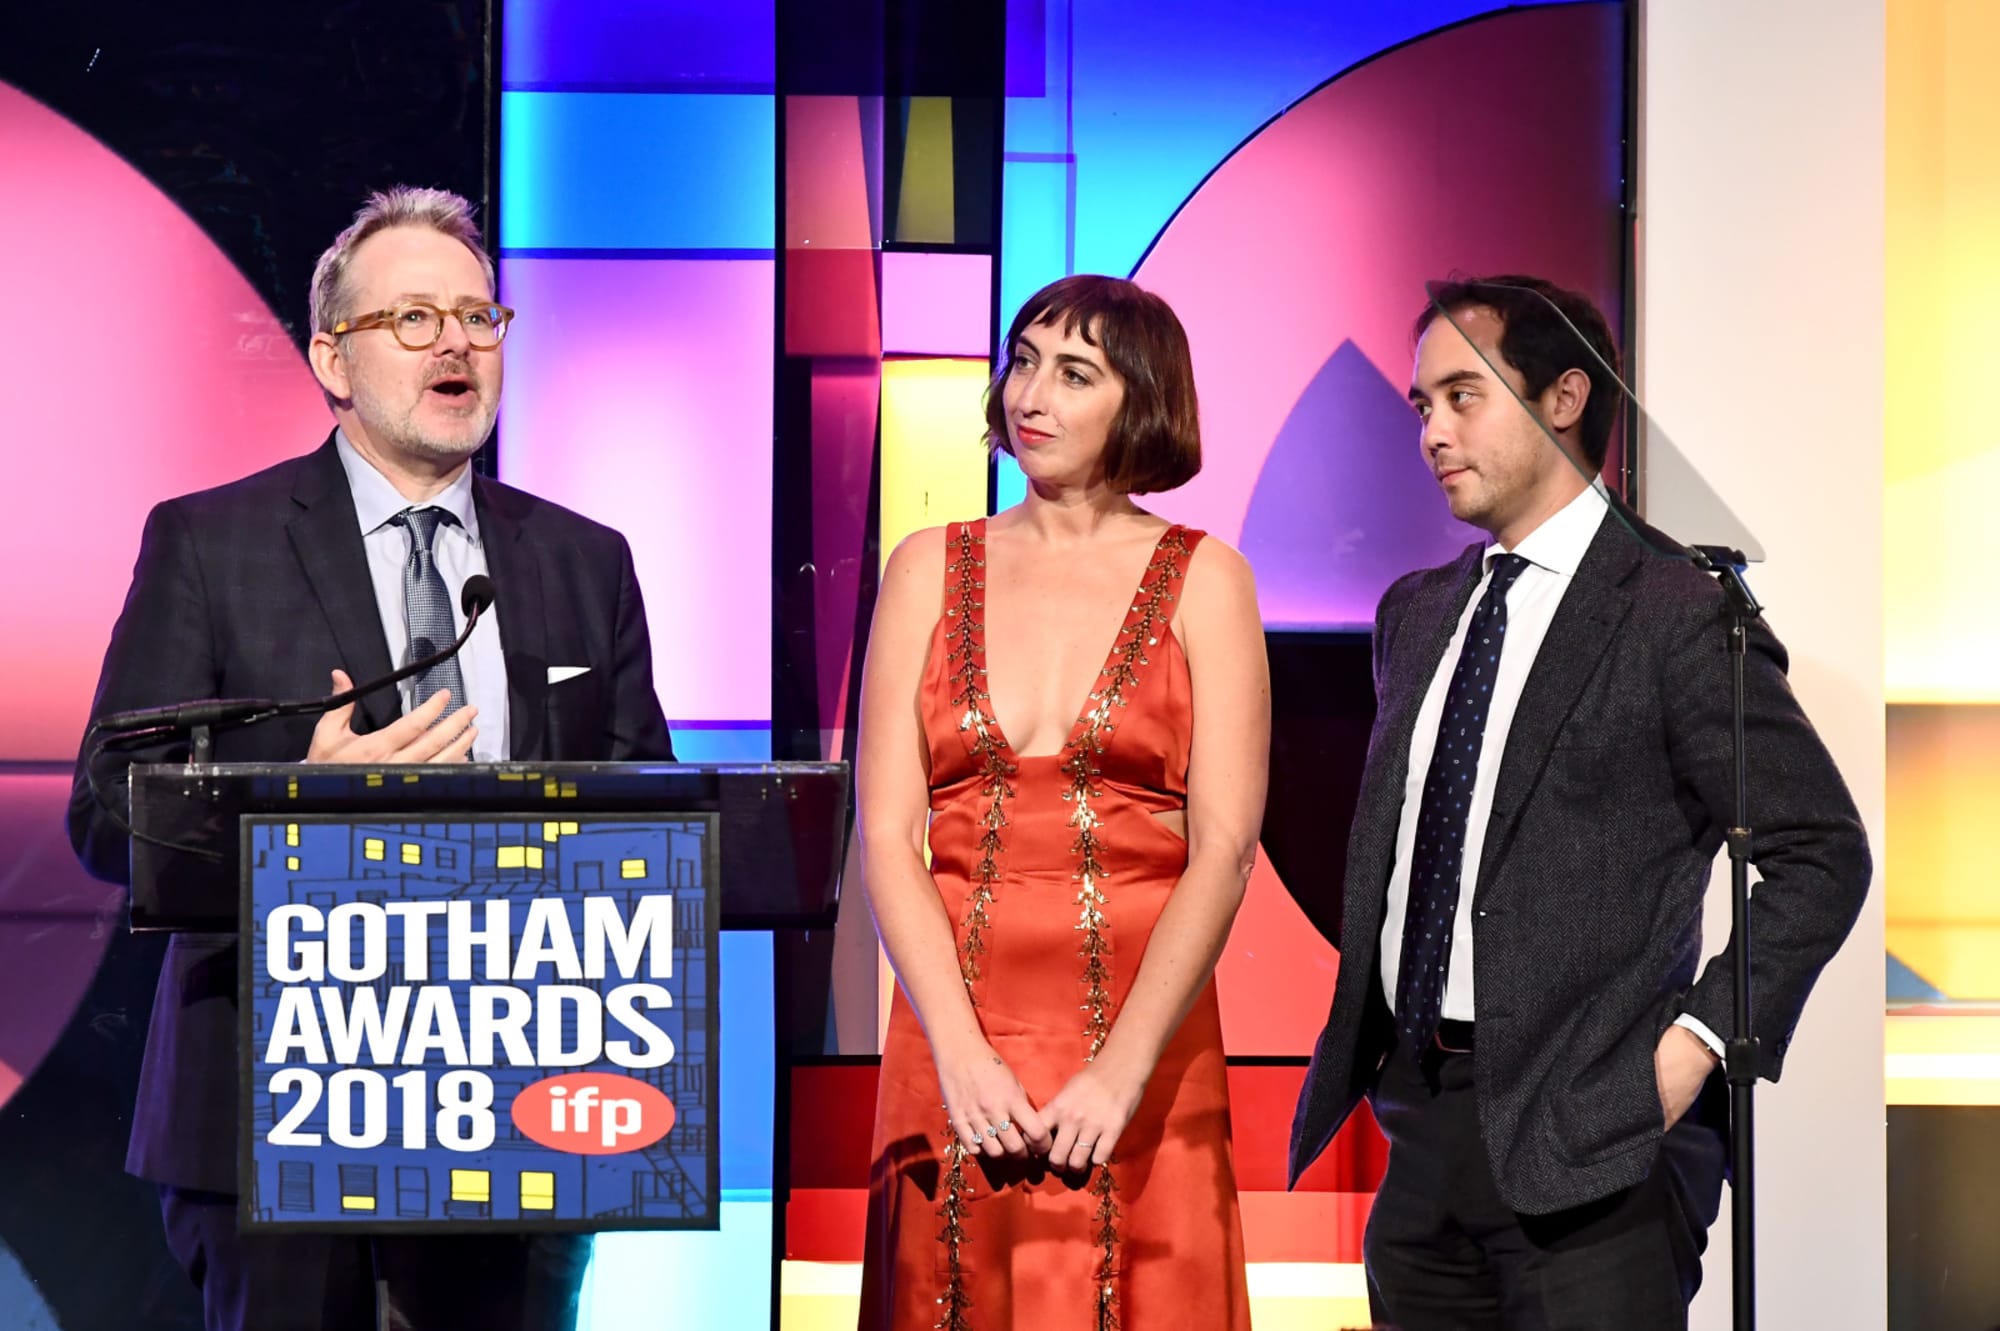 Who won at the Gotham Awards 2018 ceremony? Hosted by Robert Hall Winery